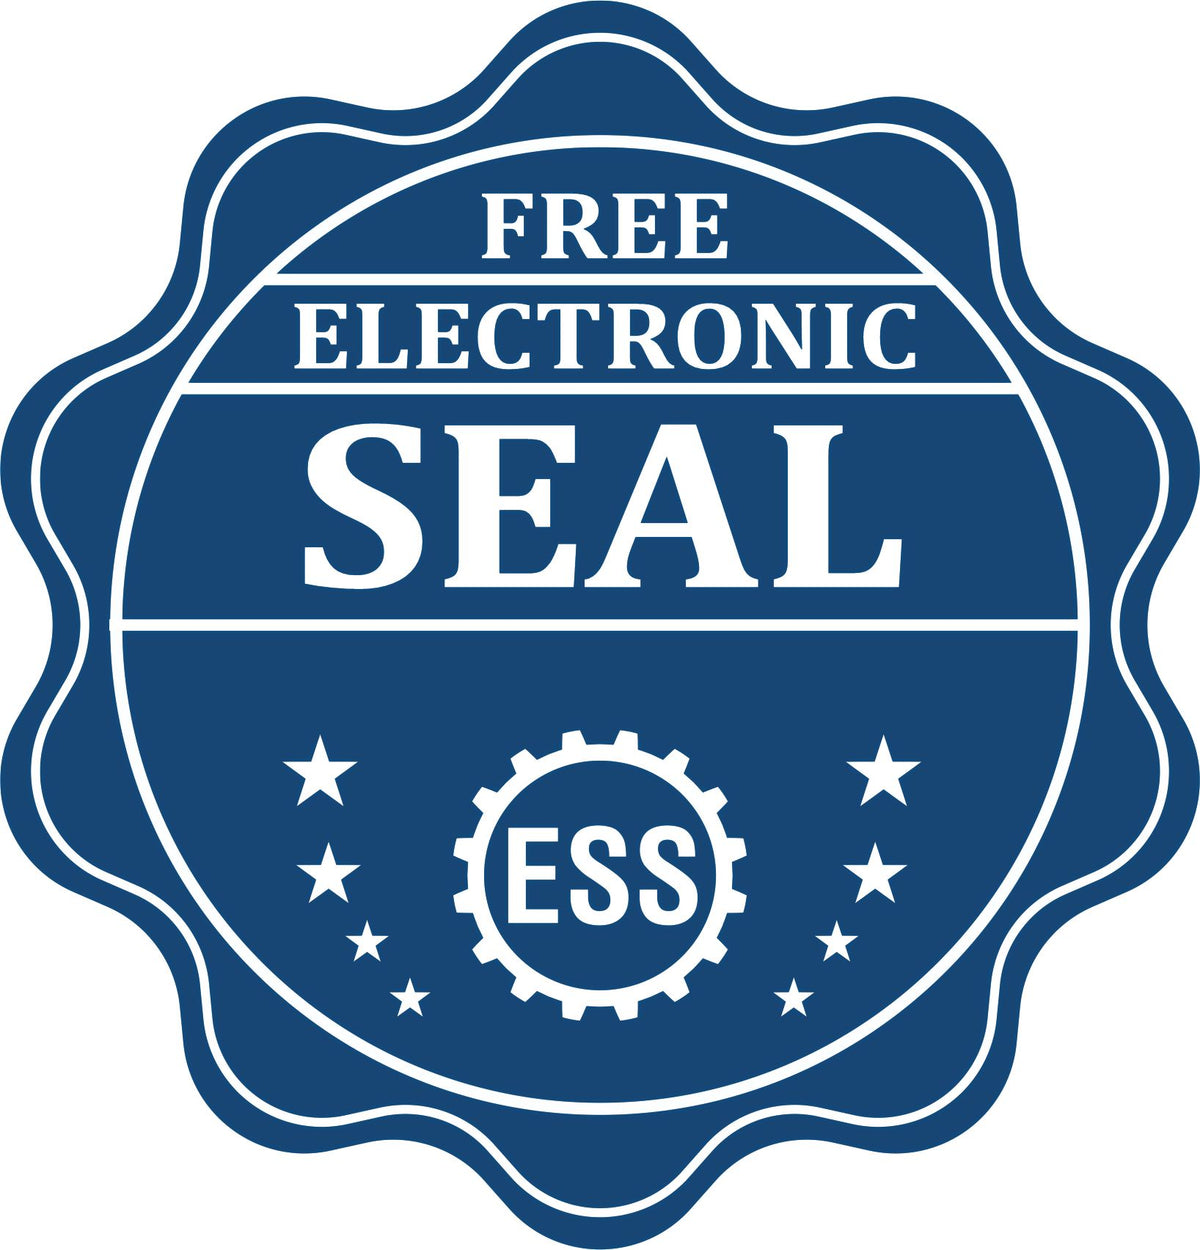 A badge showing a free electronic seal for the Hybrid South Dakota Geologist Seal with stars and the ESS gear on the emblem.